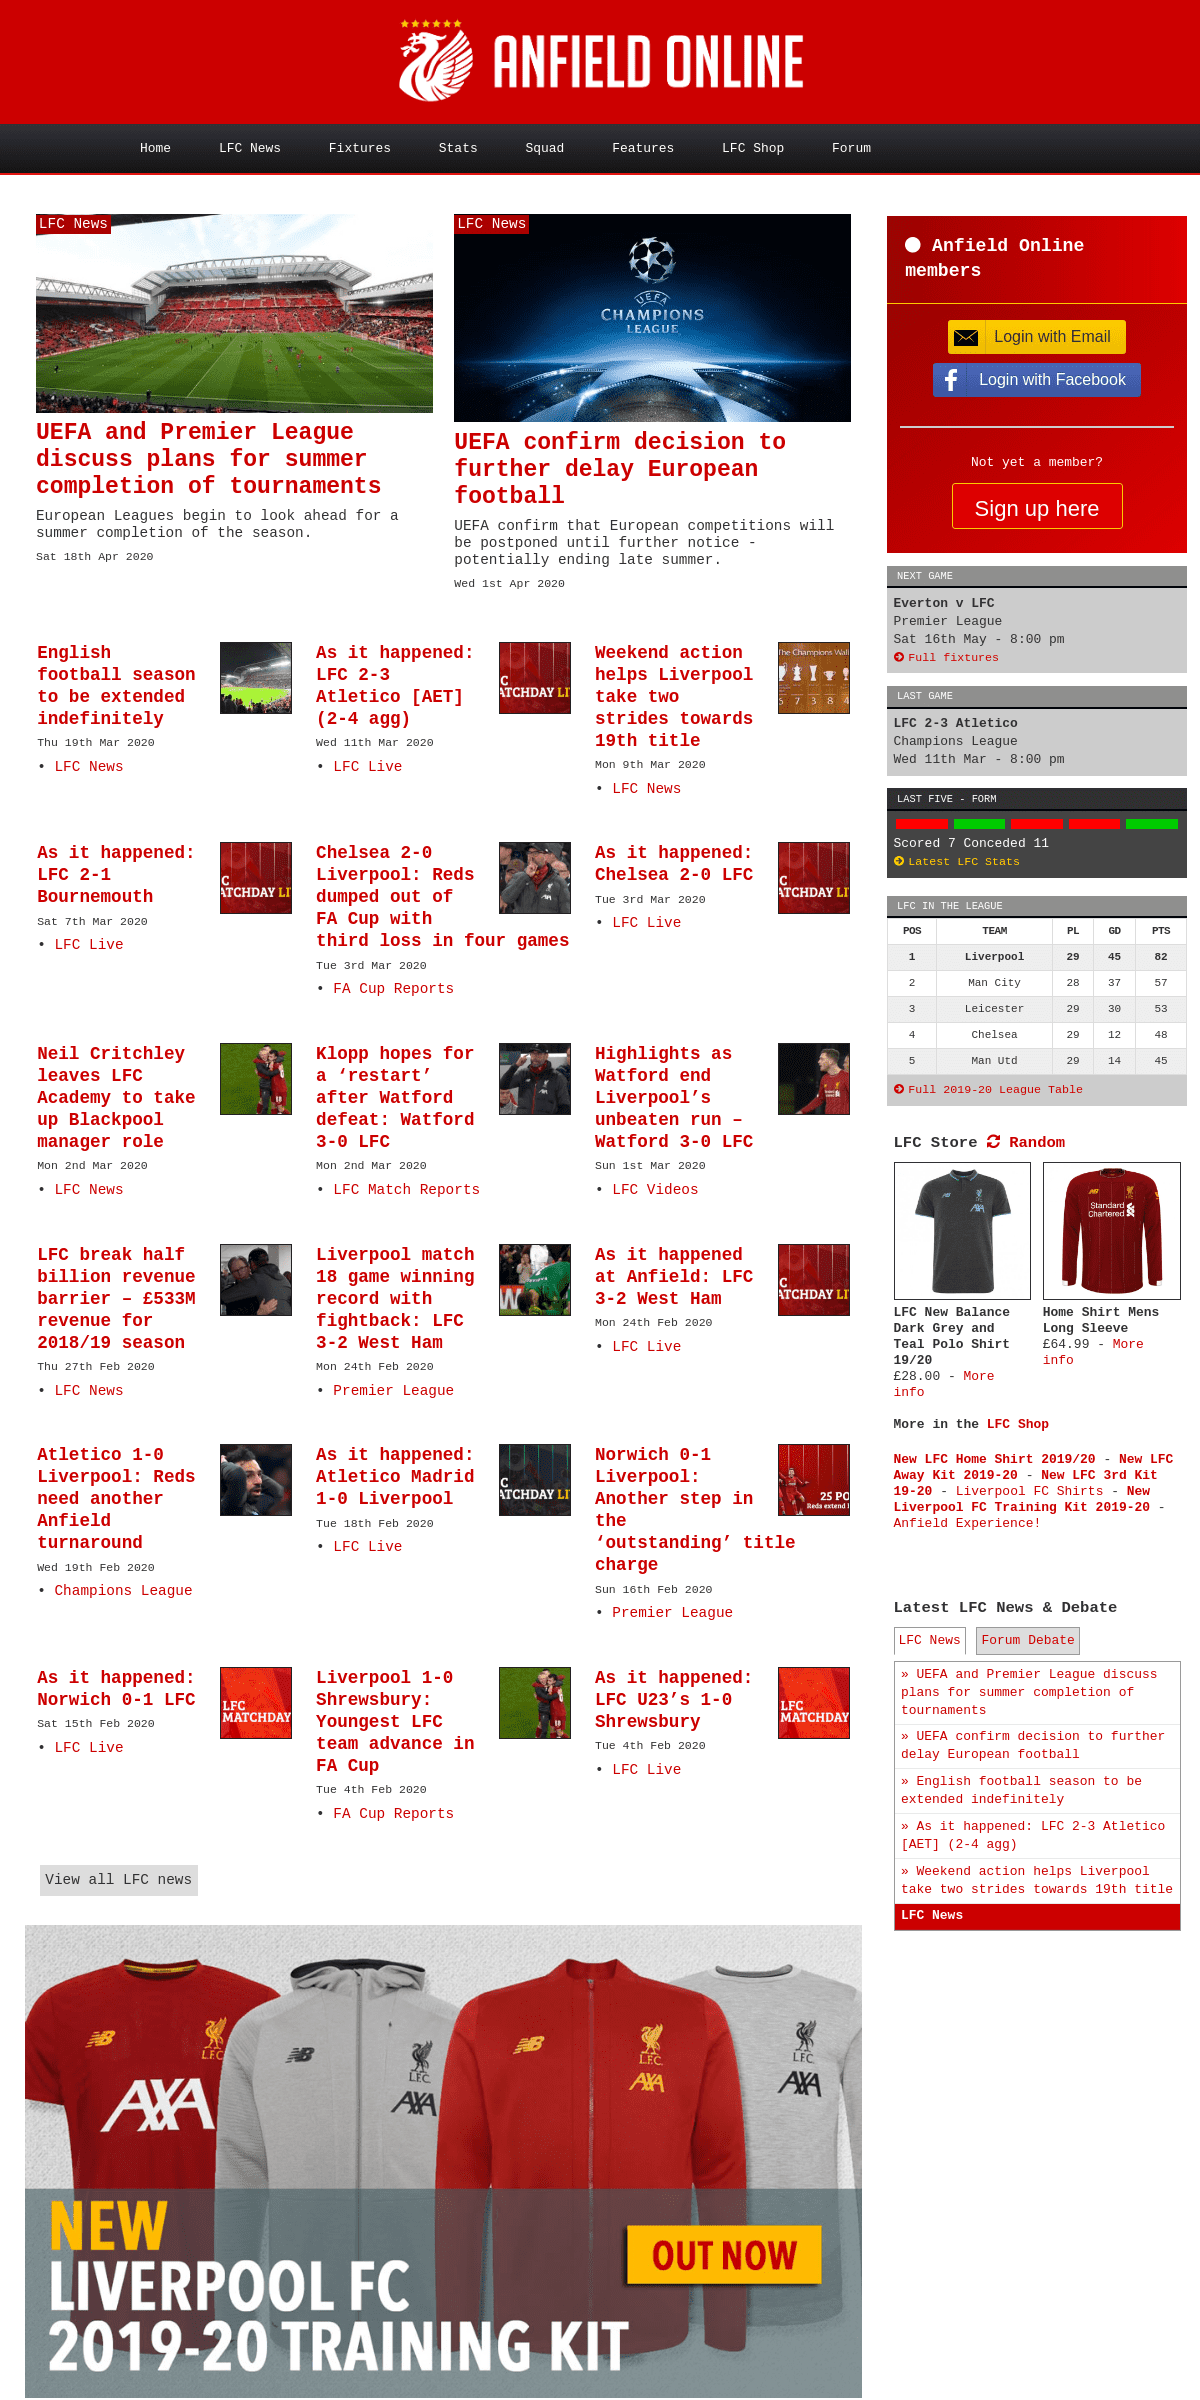 A complete backup of anfield-online.co.uk